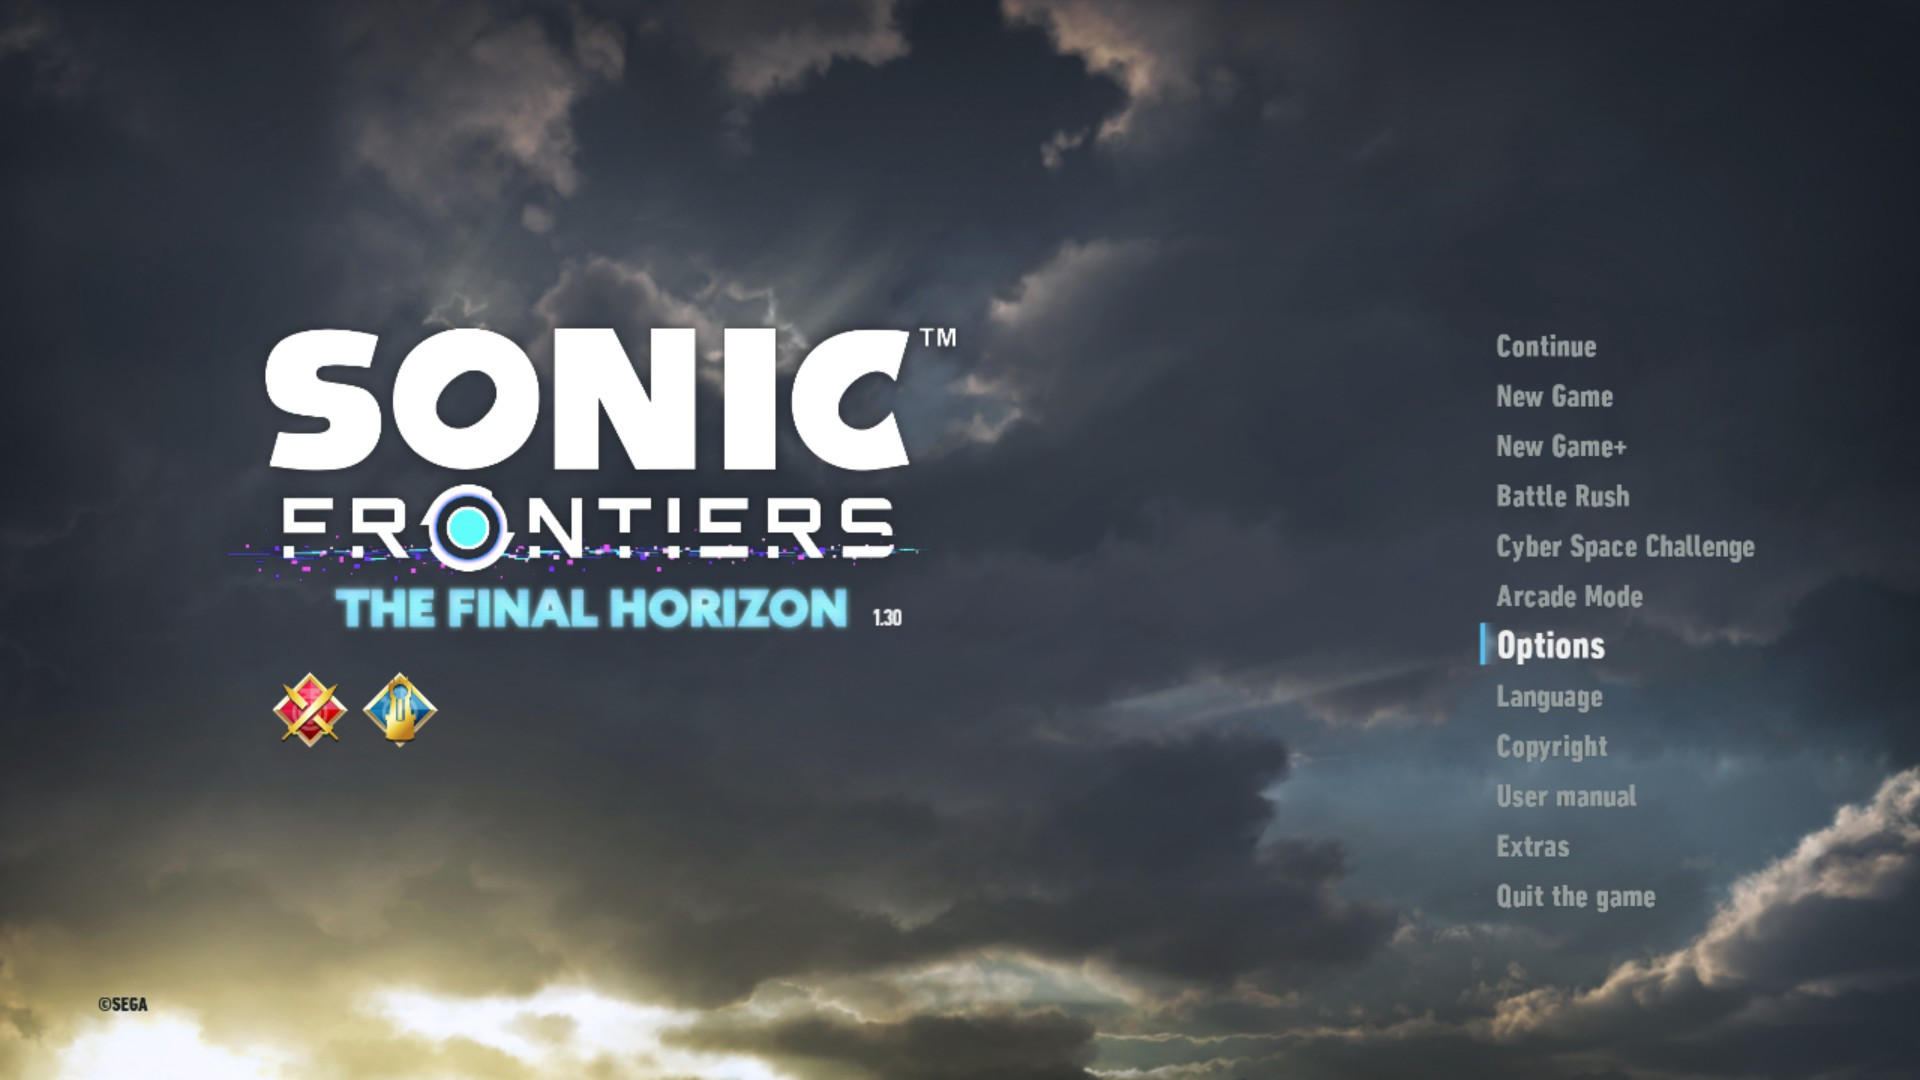 Sonic Frontiers: The Final Horizon update now available - My